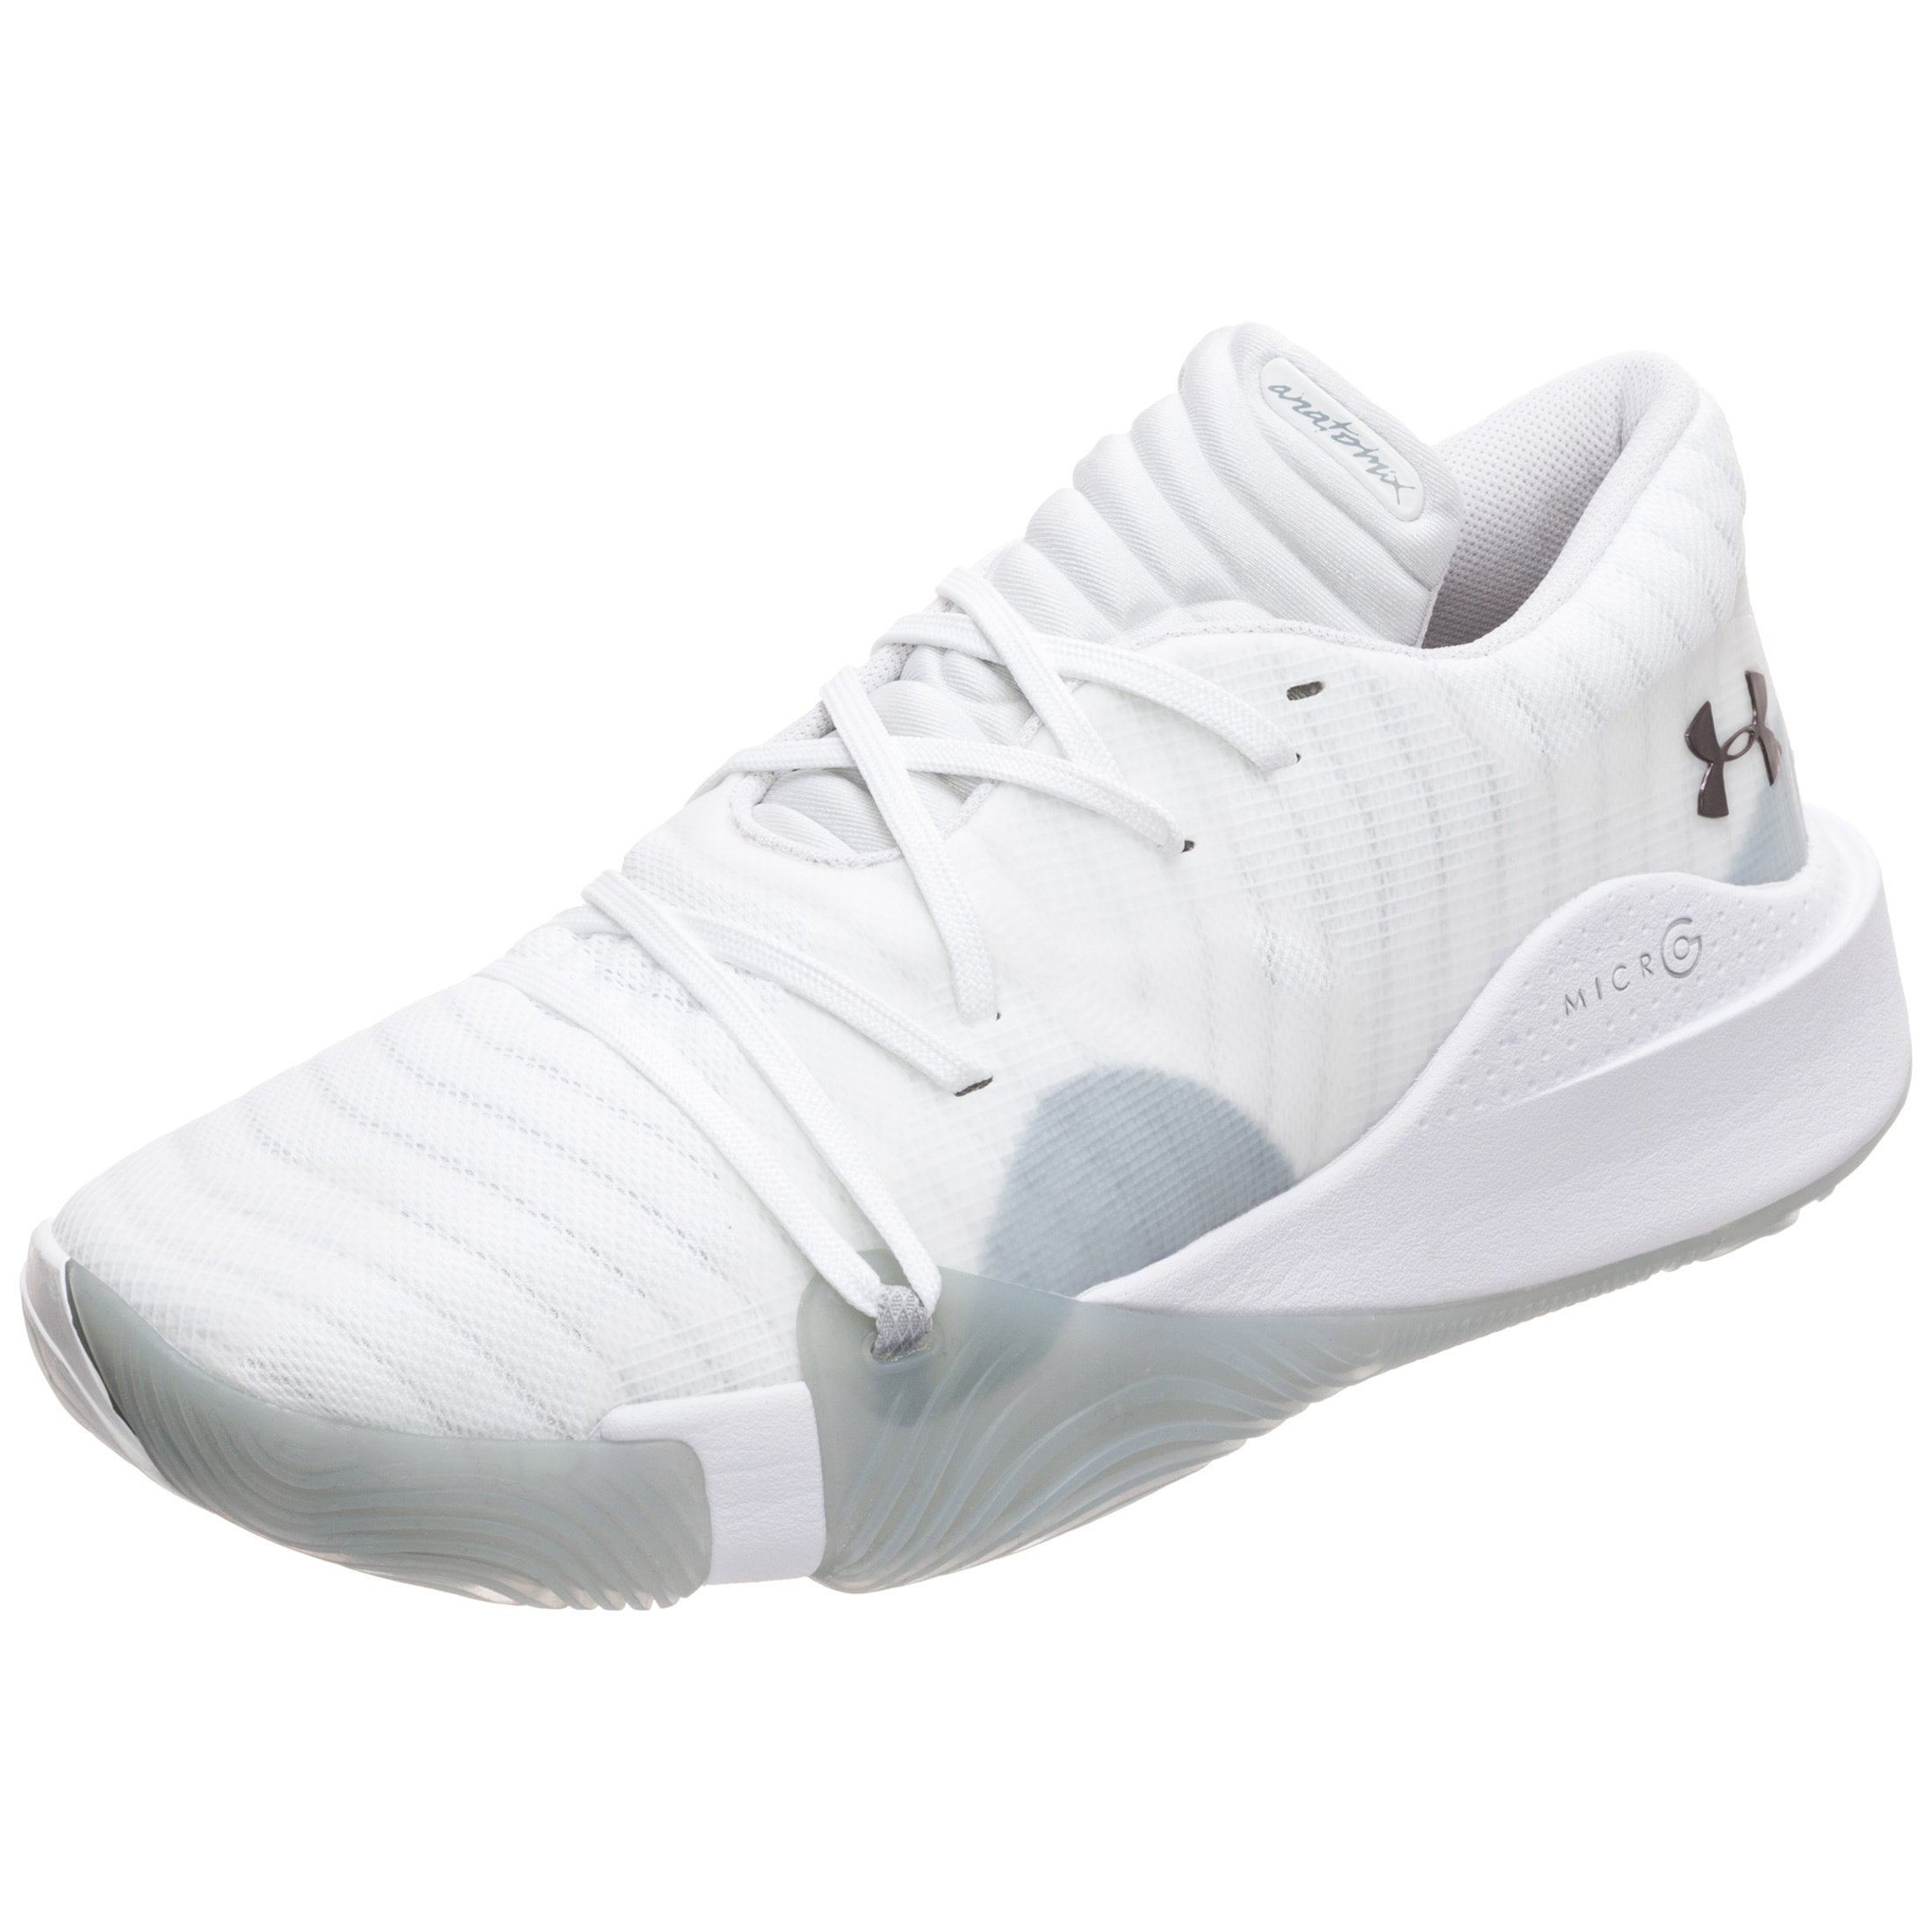 under armour men's spawn low basketball shoes